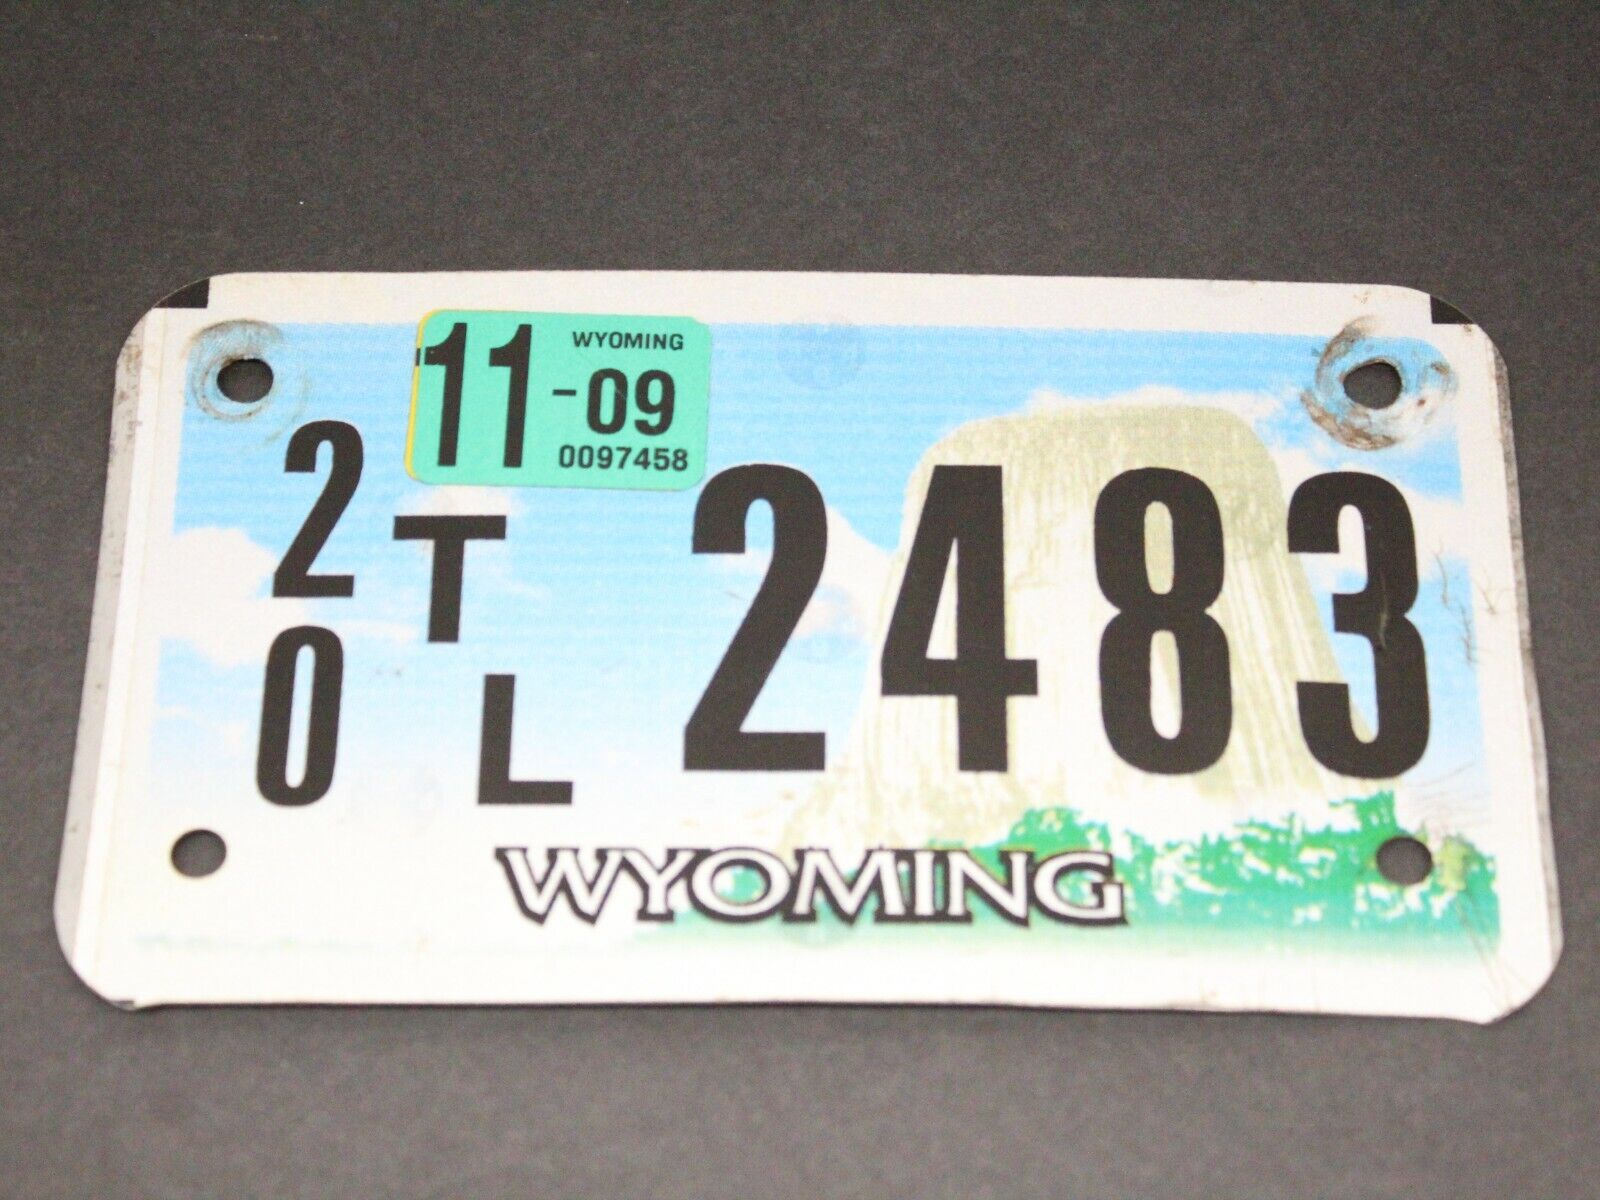 Wyoming Atv Or Trailer License Plate 7x4" #20 Tl 2483 Expired 11-09